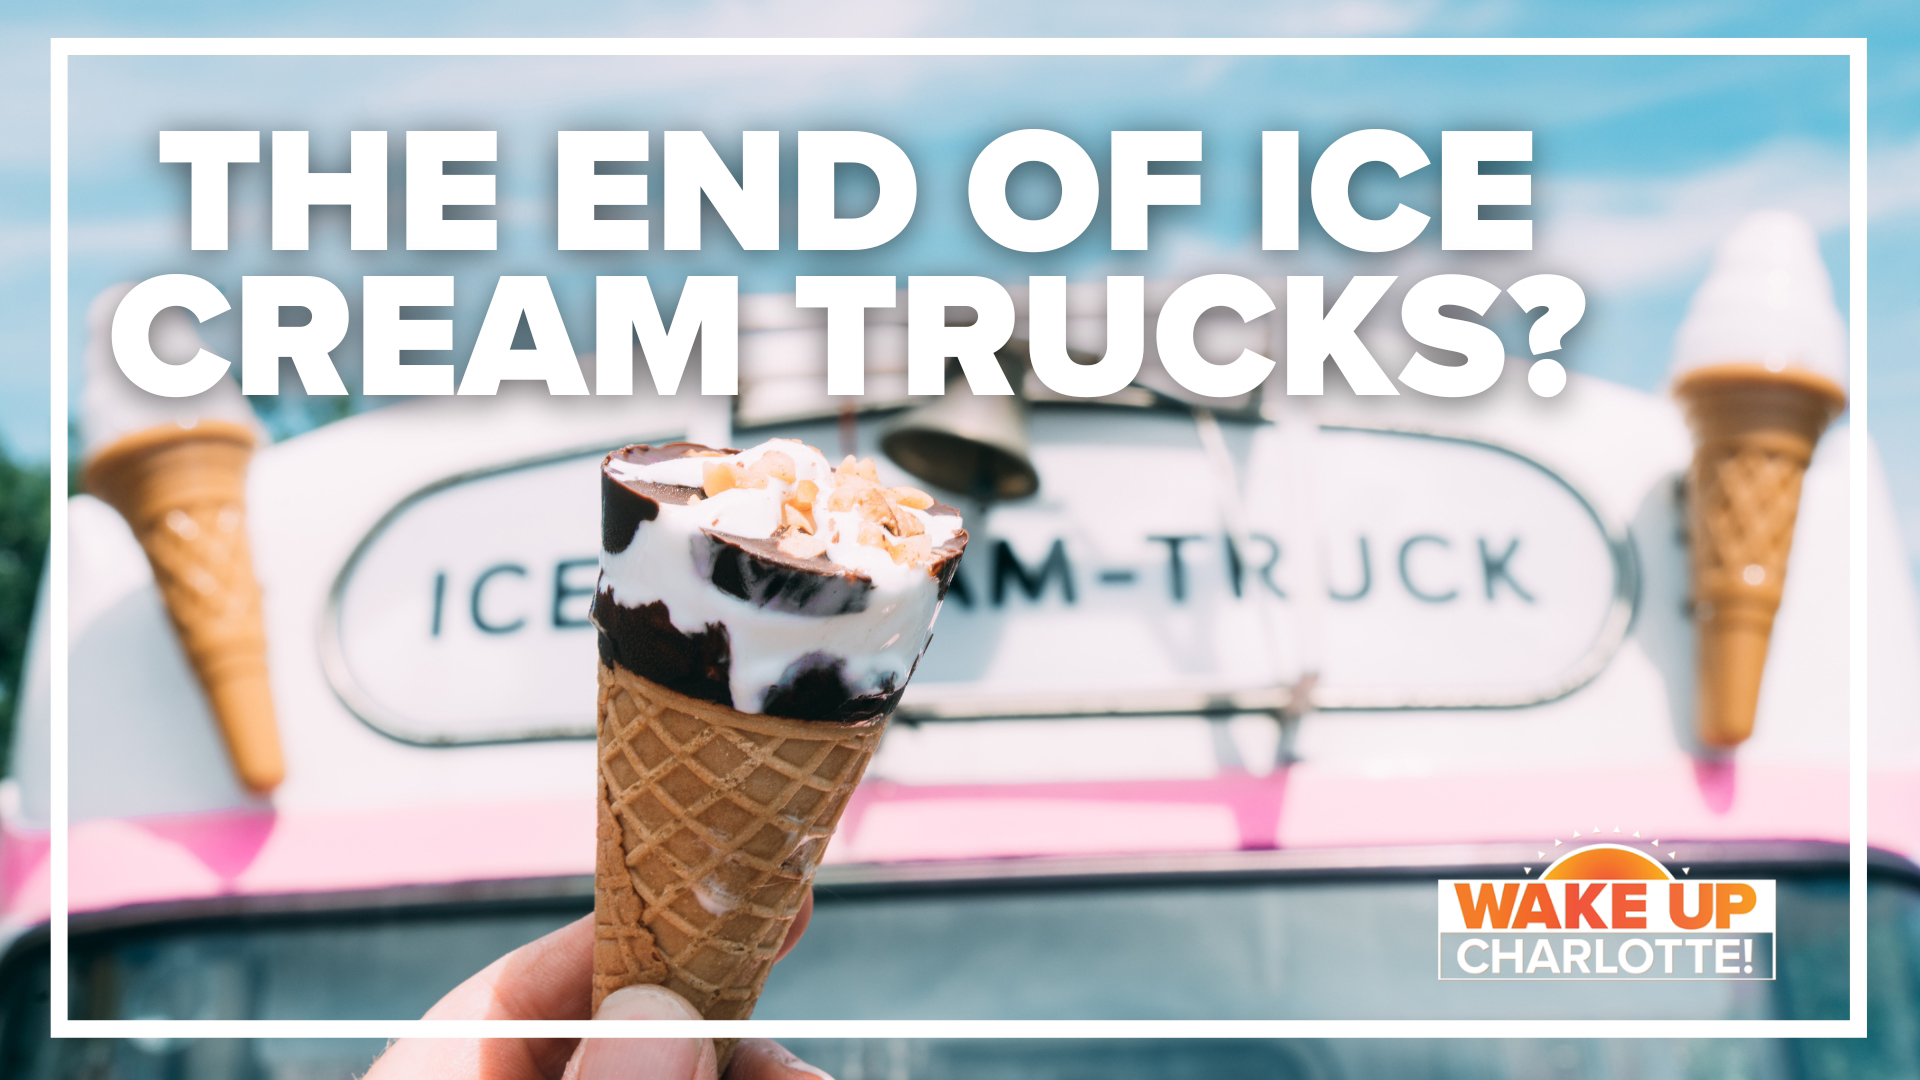 Rising gas and food prices mean you could see fewer ice cream trucks going through your neighborhood